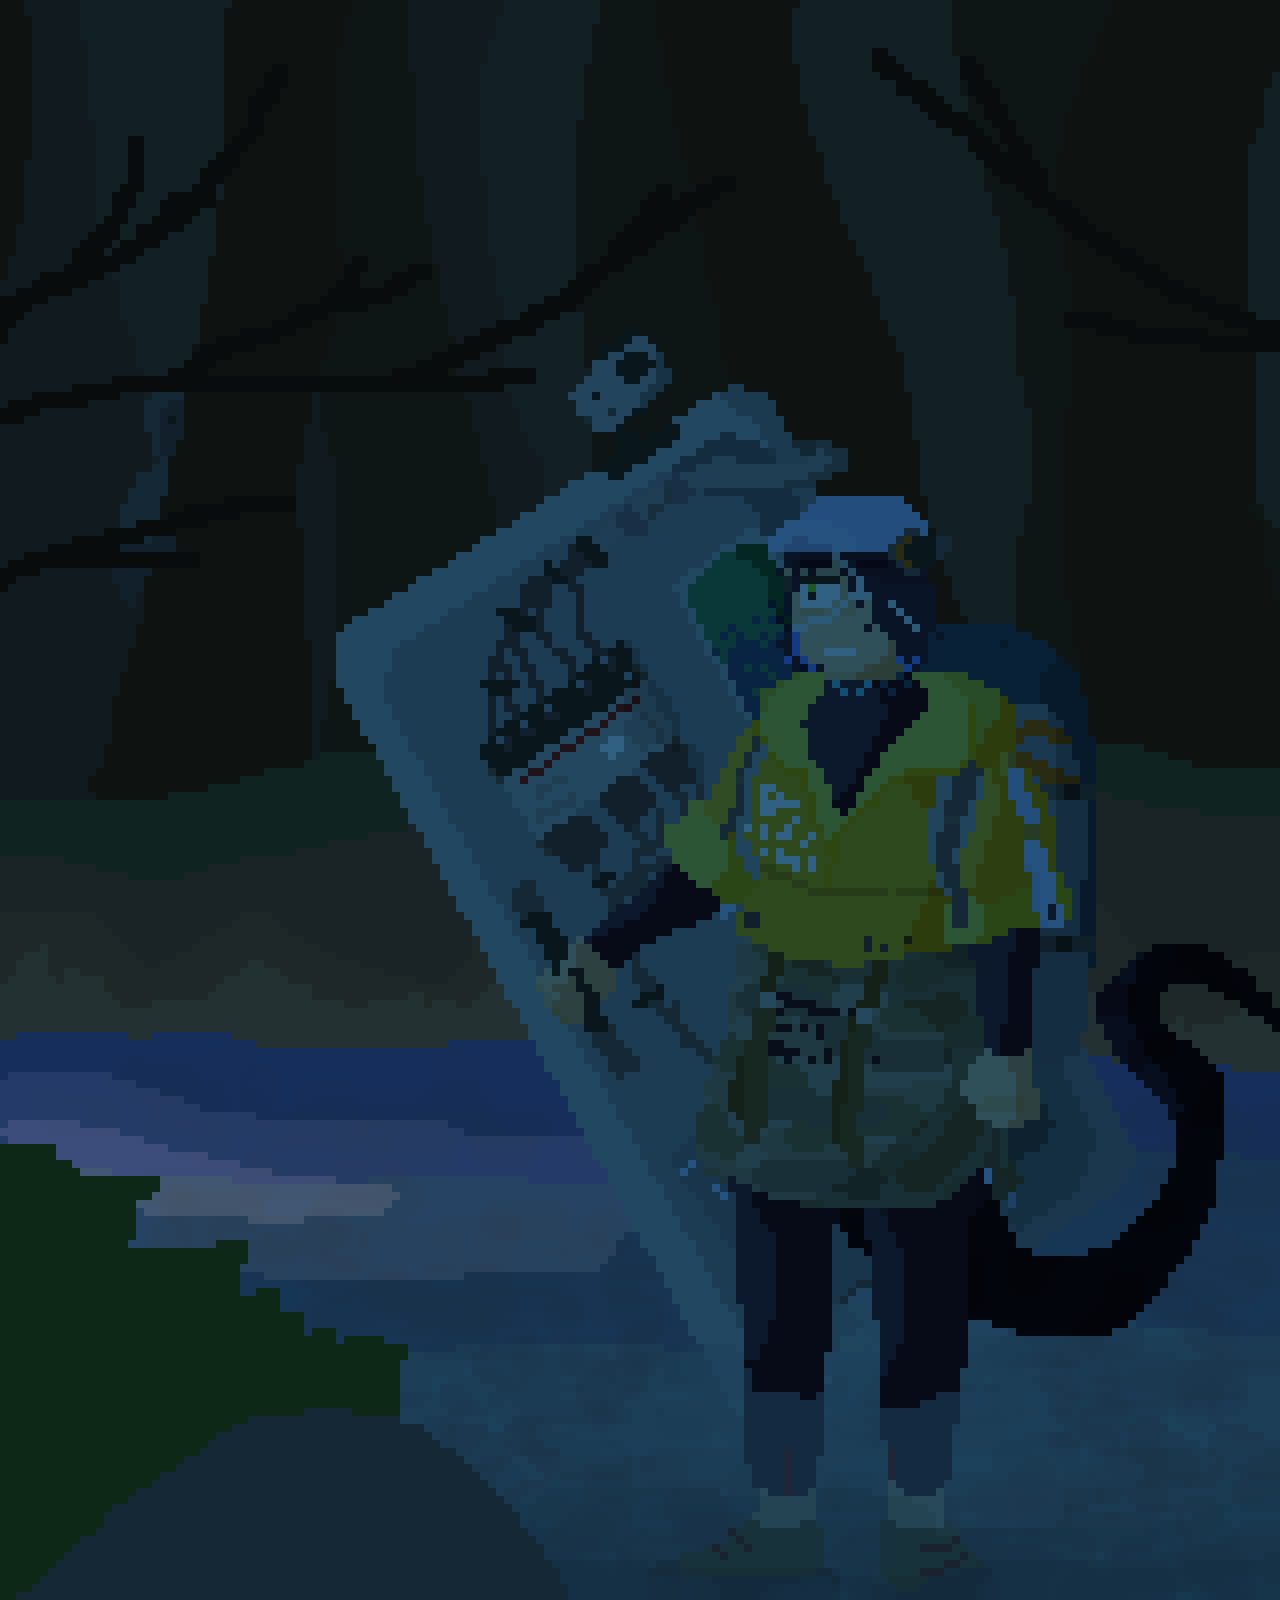  a pixelart gif asbestos stands in a river with her door-shield, shifting it to get a better grip. its dark. there are some masked individuals hidden out in the darkness.